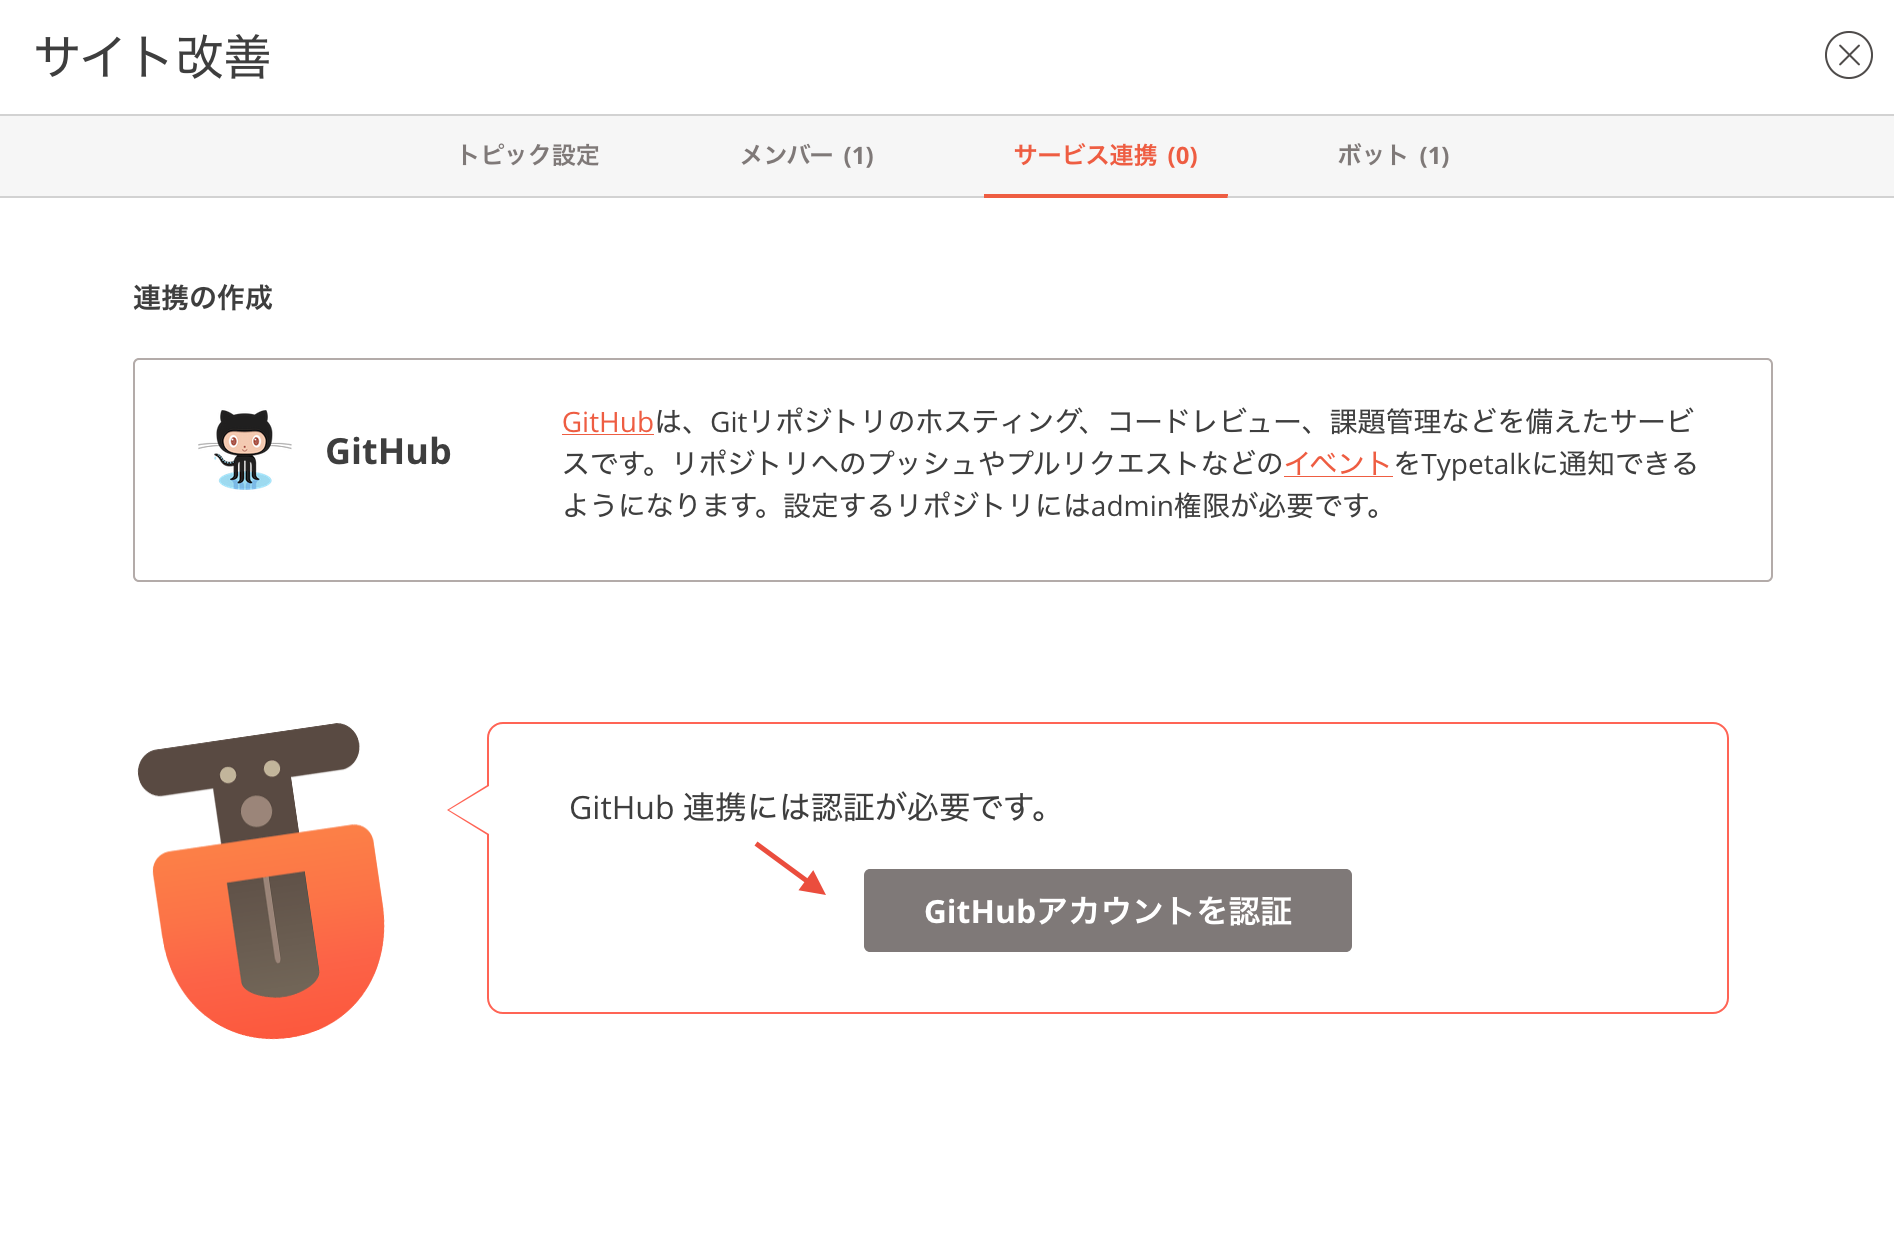 Add_help_about_GitHub_integration_to_FAQ_ja_04.png